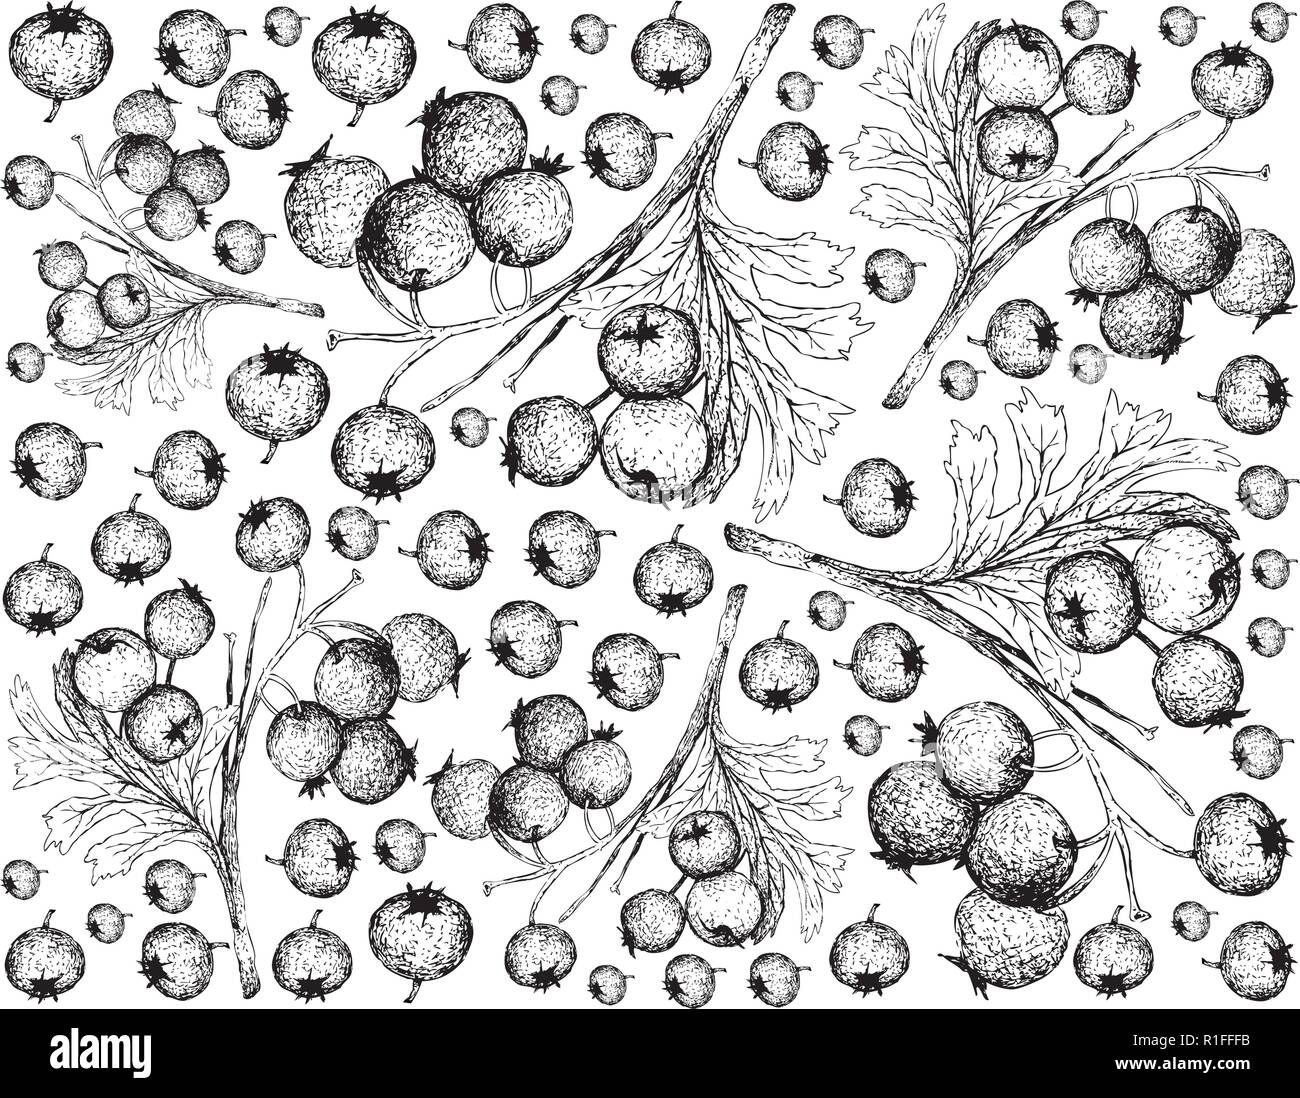 Tropical Fruit, Illustration Wallpaper of Hand Drawn Sketch Hawthorn Berries or Crataegus Fruits Isolated on White Background. Used for Food and Natur Stock Vector